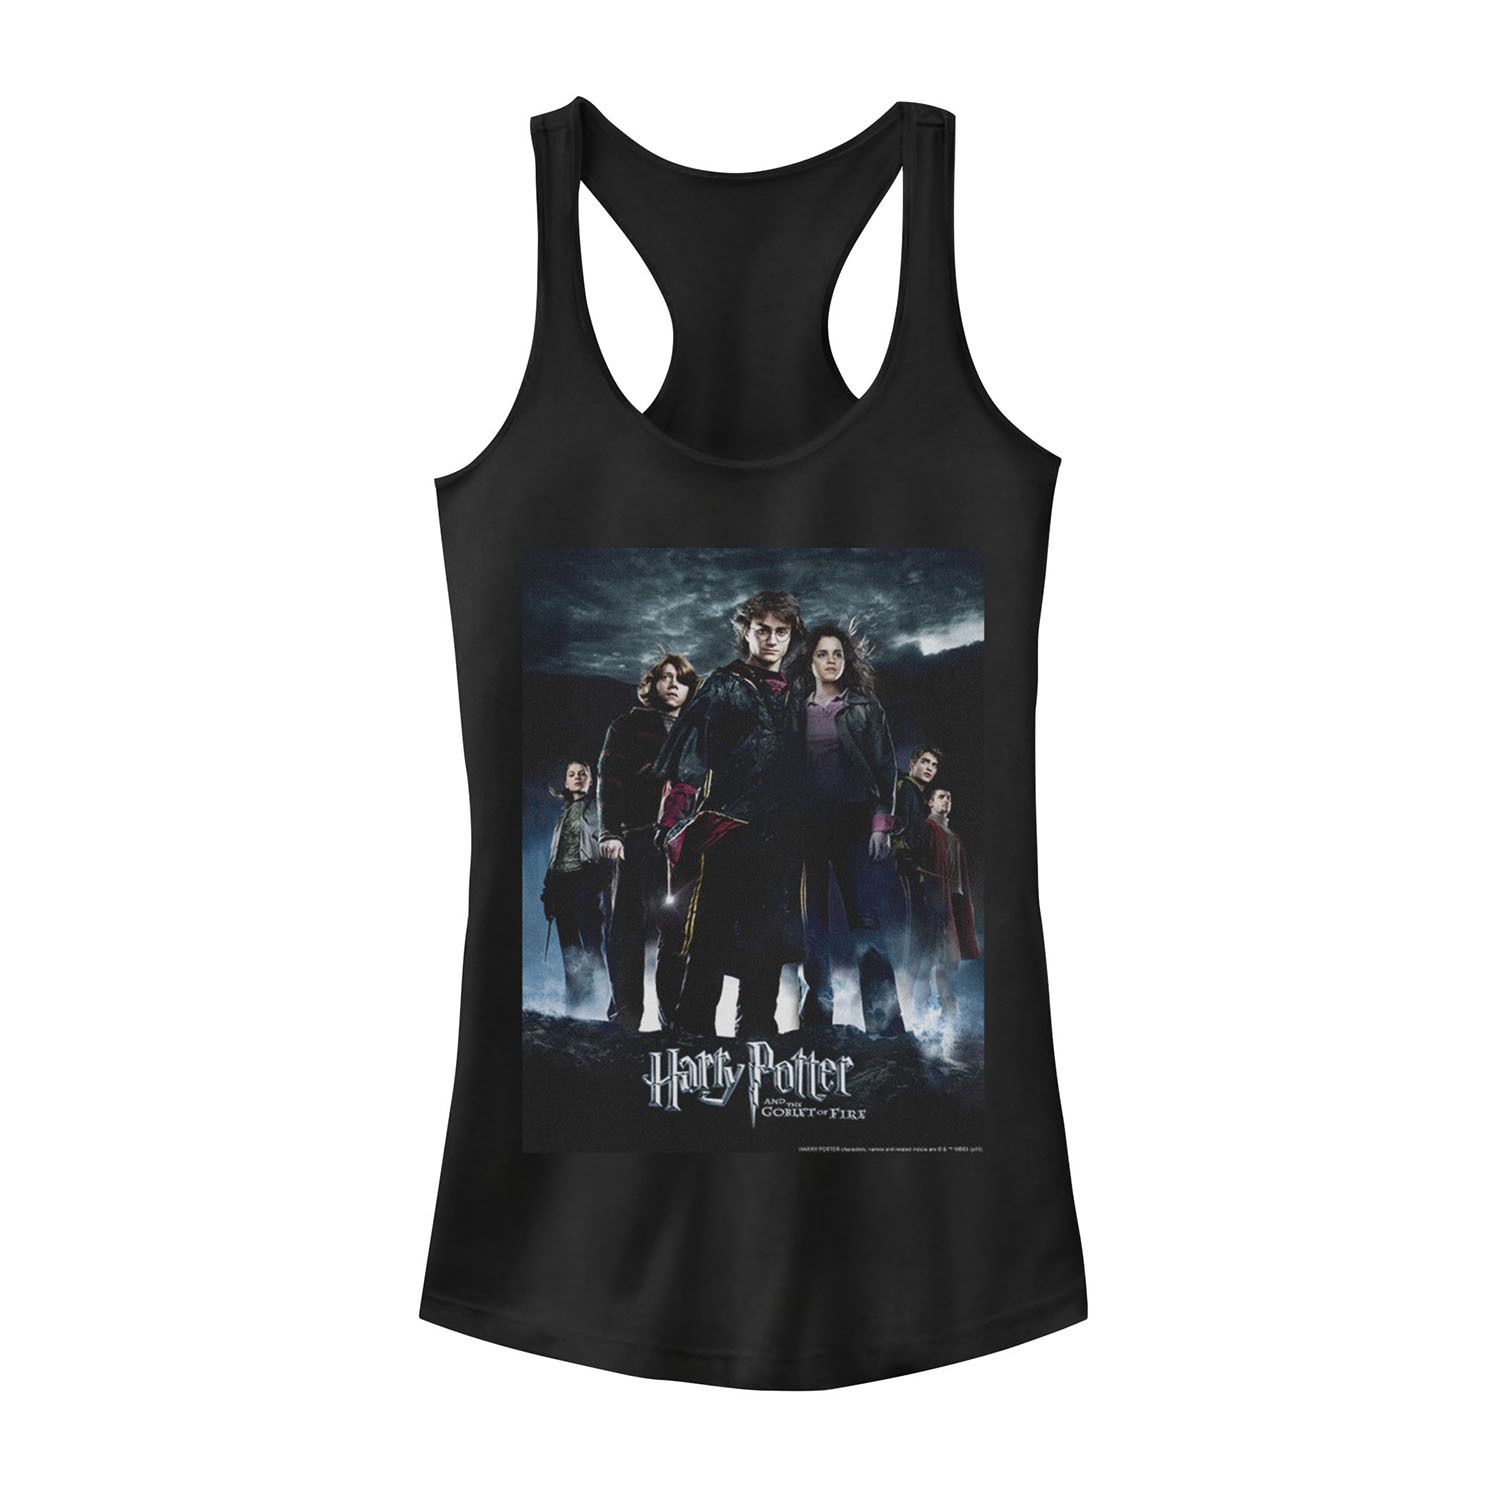 Image for Harry Potter Juniors' And The Goblet Of Fire Poster Tank Top at Kohl's.